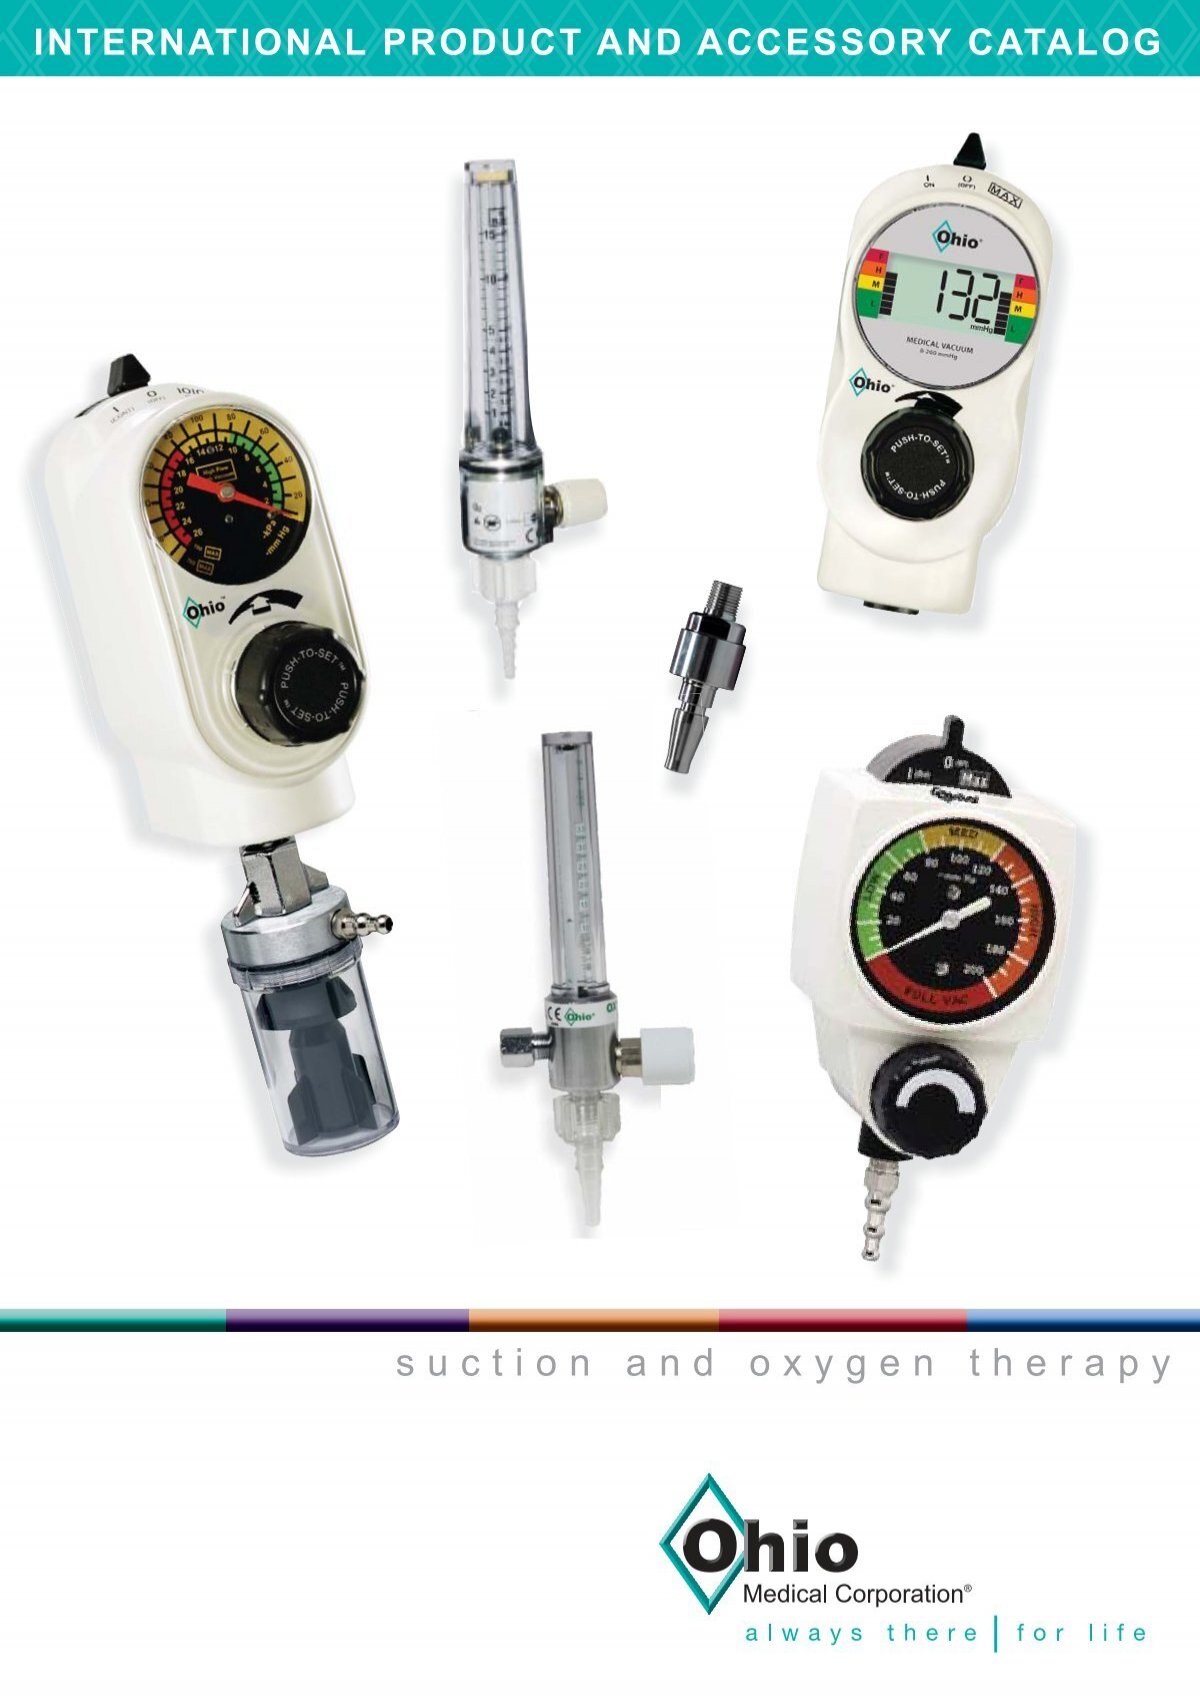 Suction And Oxygen Therapy - Ohio Medical Corporation